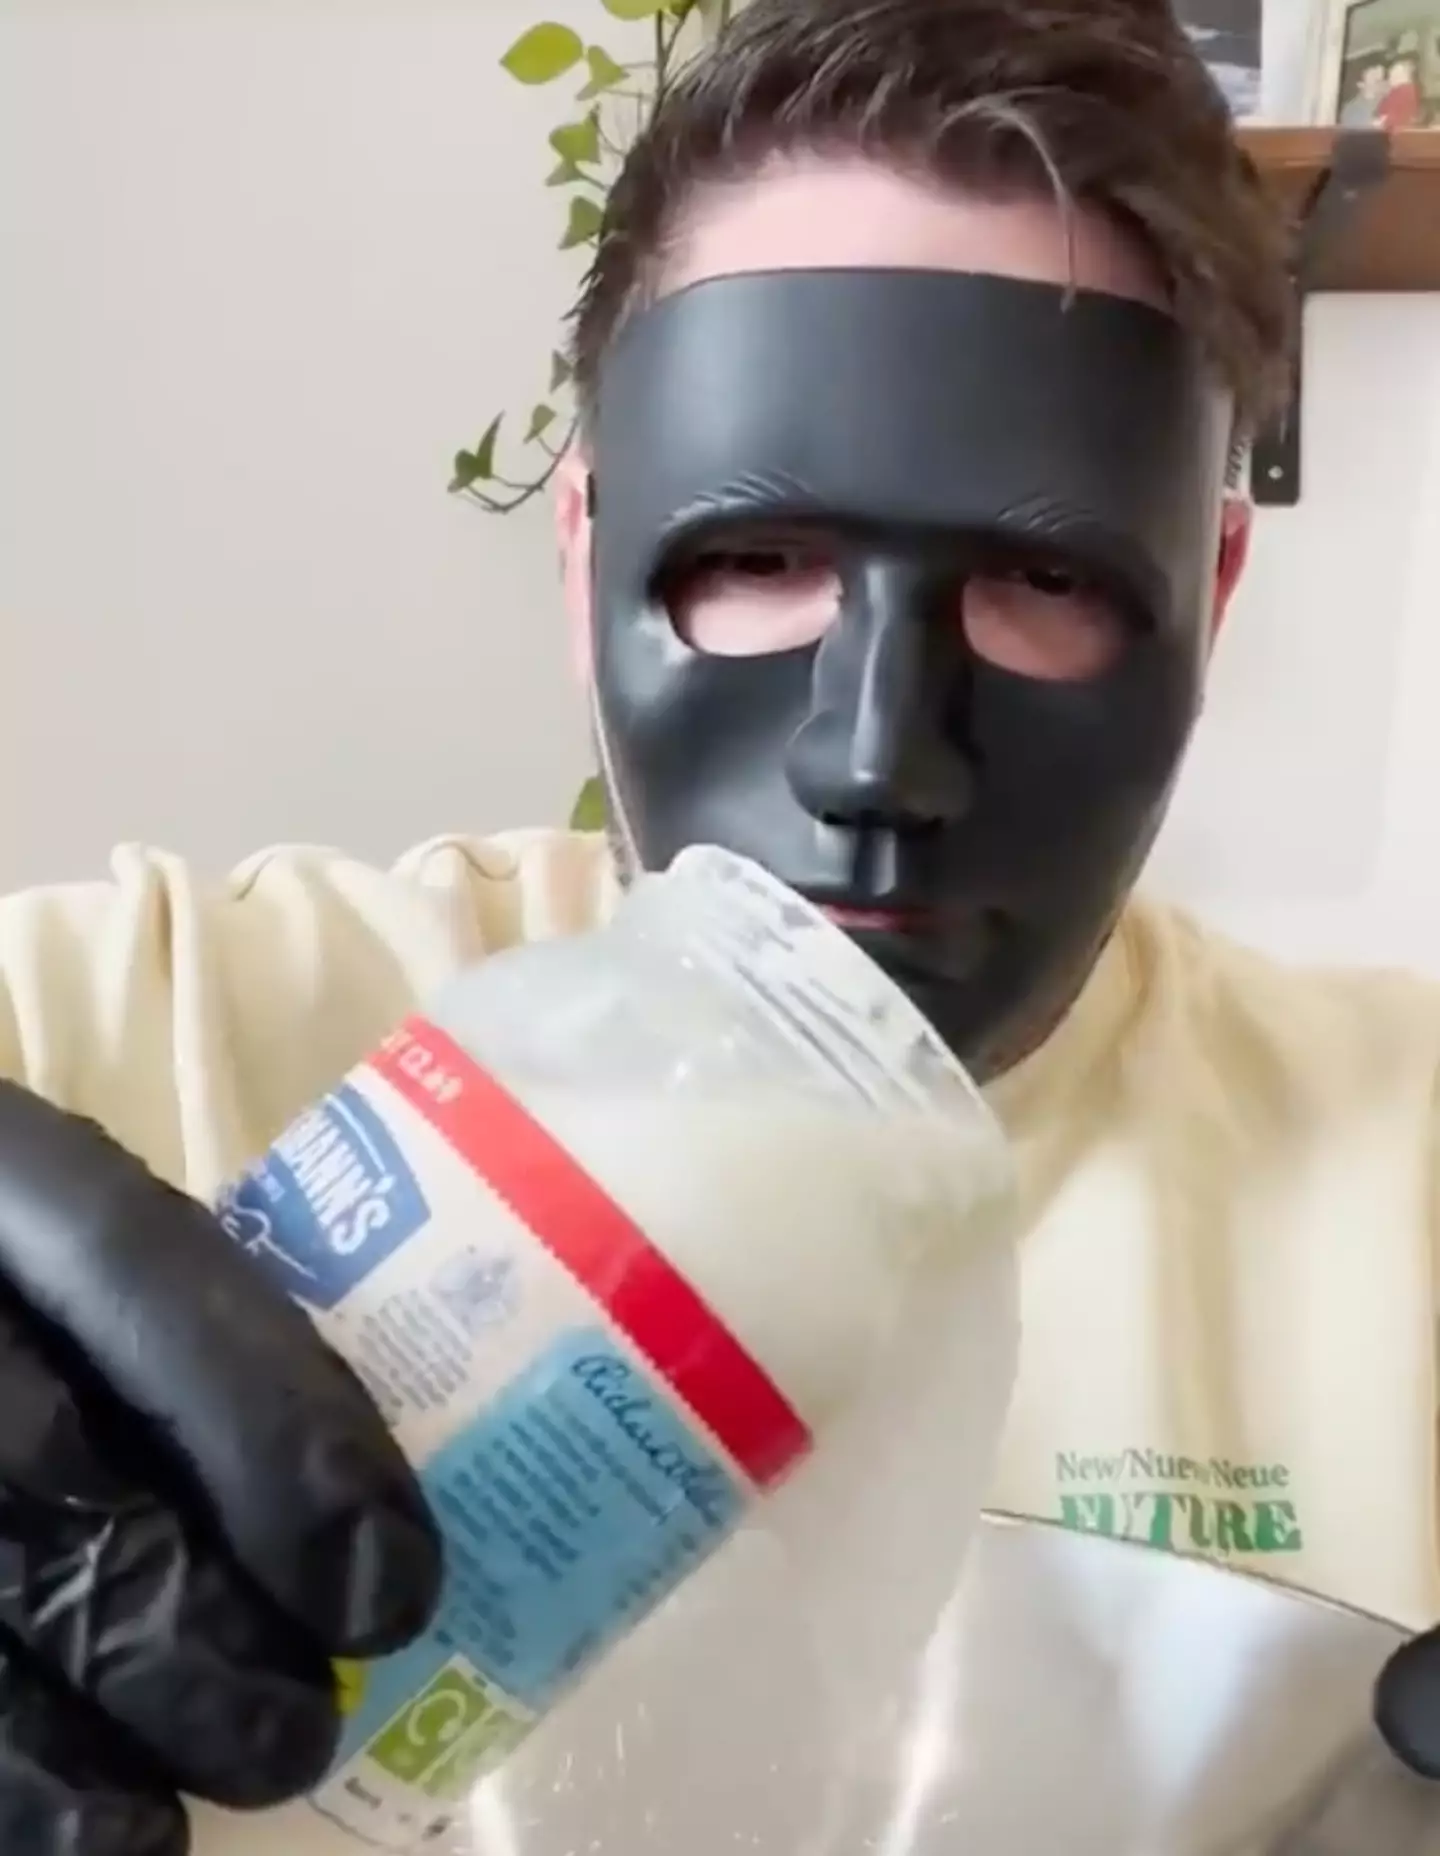 Red Mask regularly shares videos about his dark web boxes.